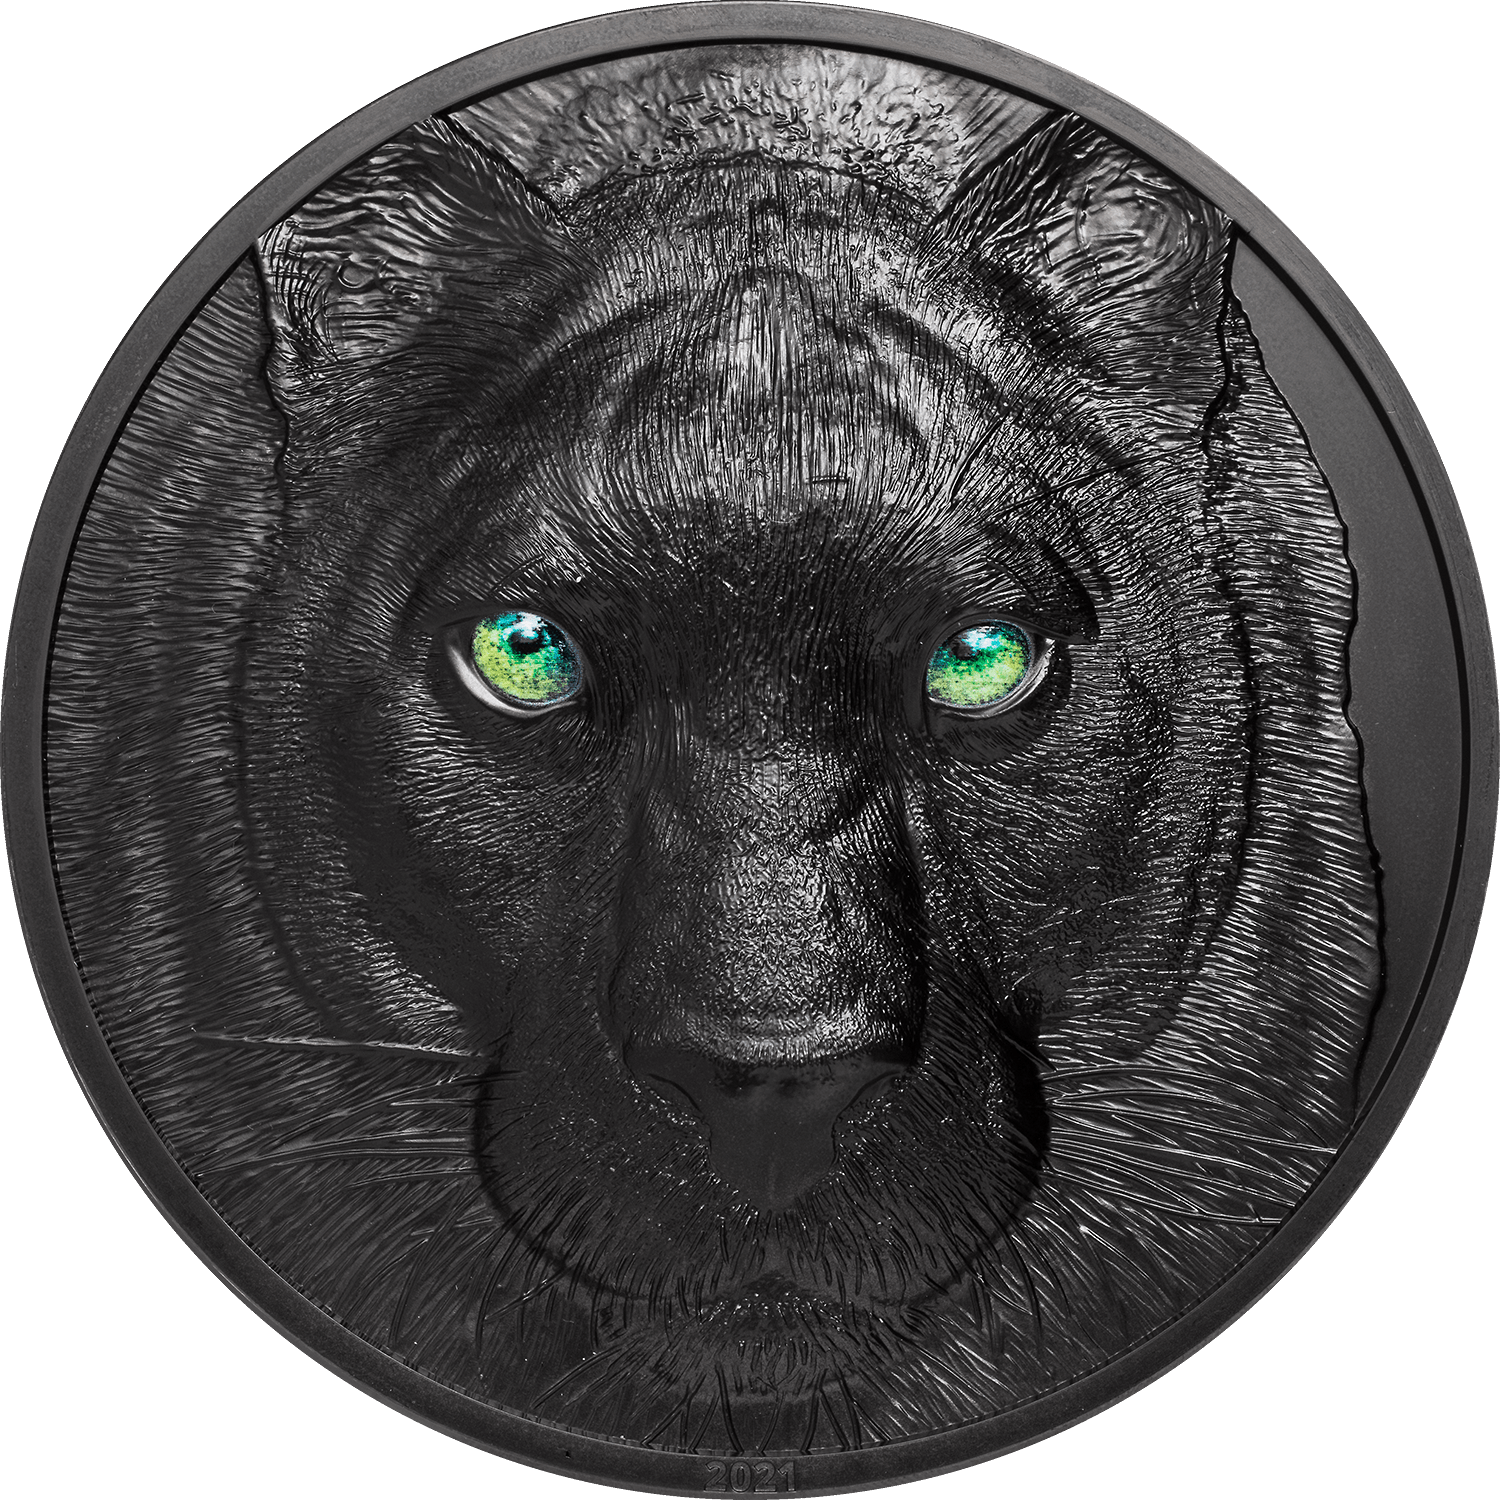 BLACK PANTHER Hunters by Night 1 Kg Kilo Silver Coin $50 Palau 2021 - PARTHAVA COIN